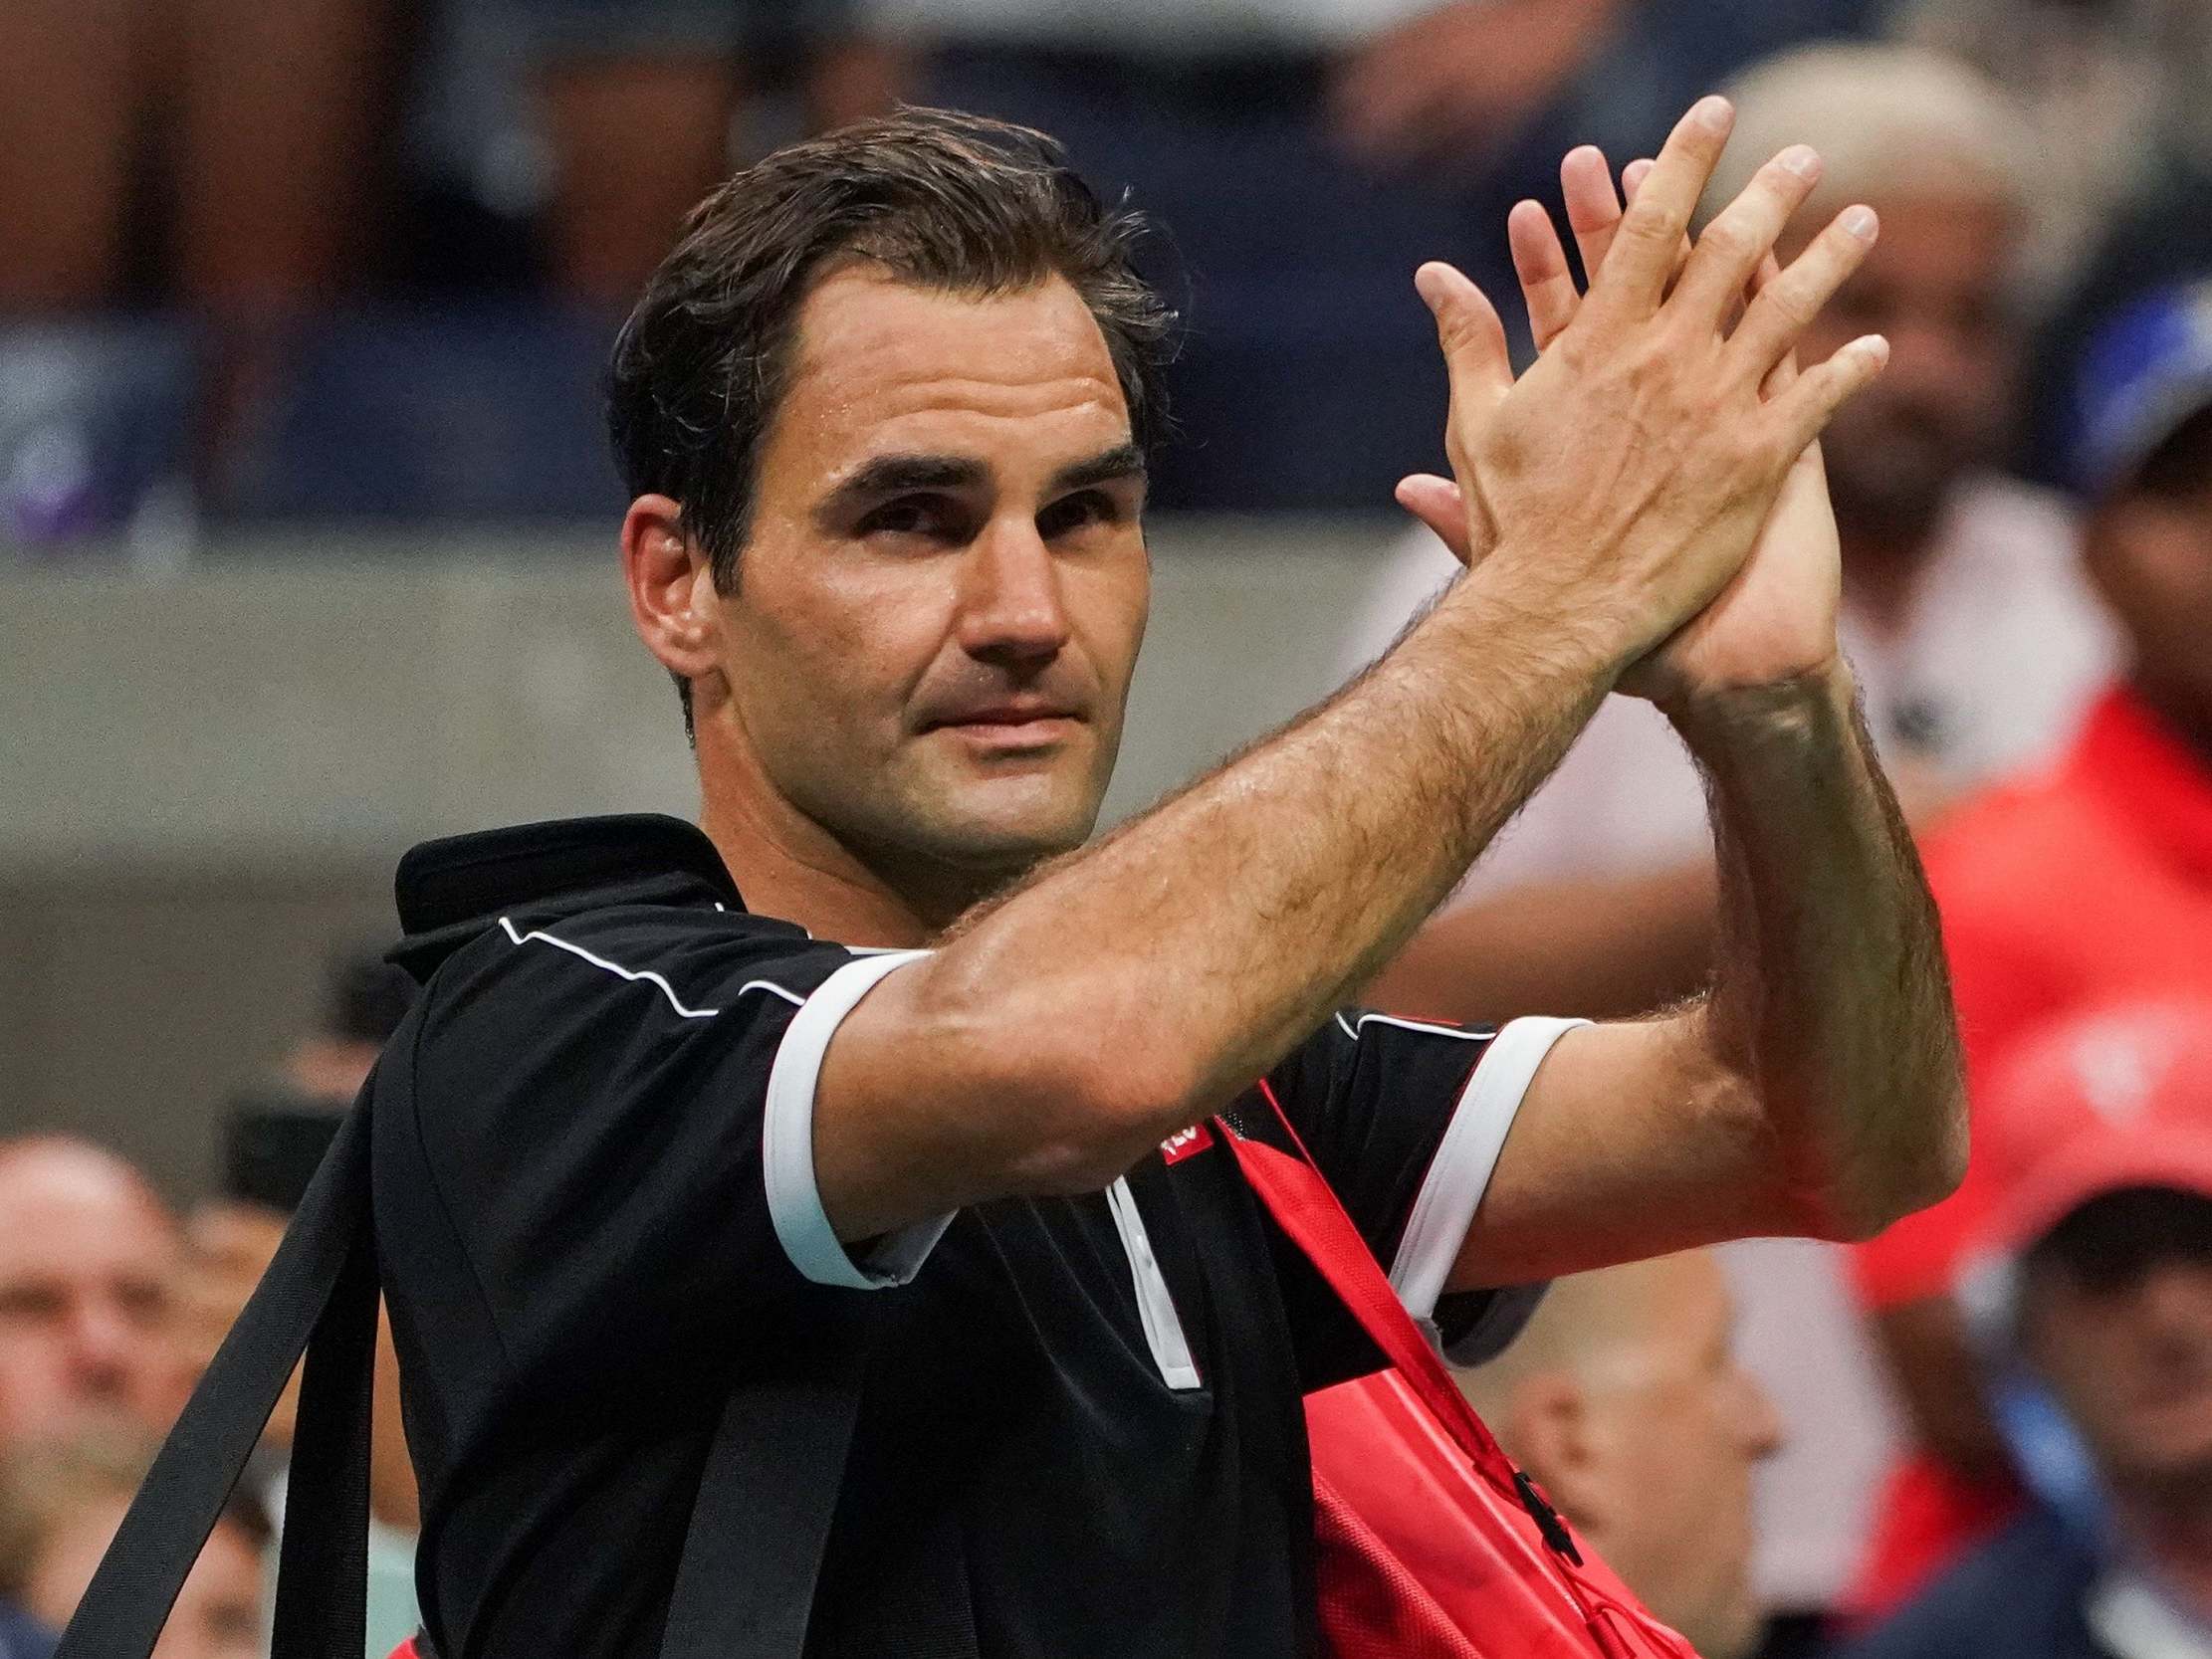 ATP Cup Roger Federer pulls out of inaugural event in Australia The